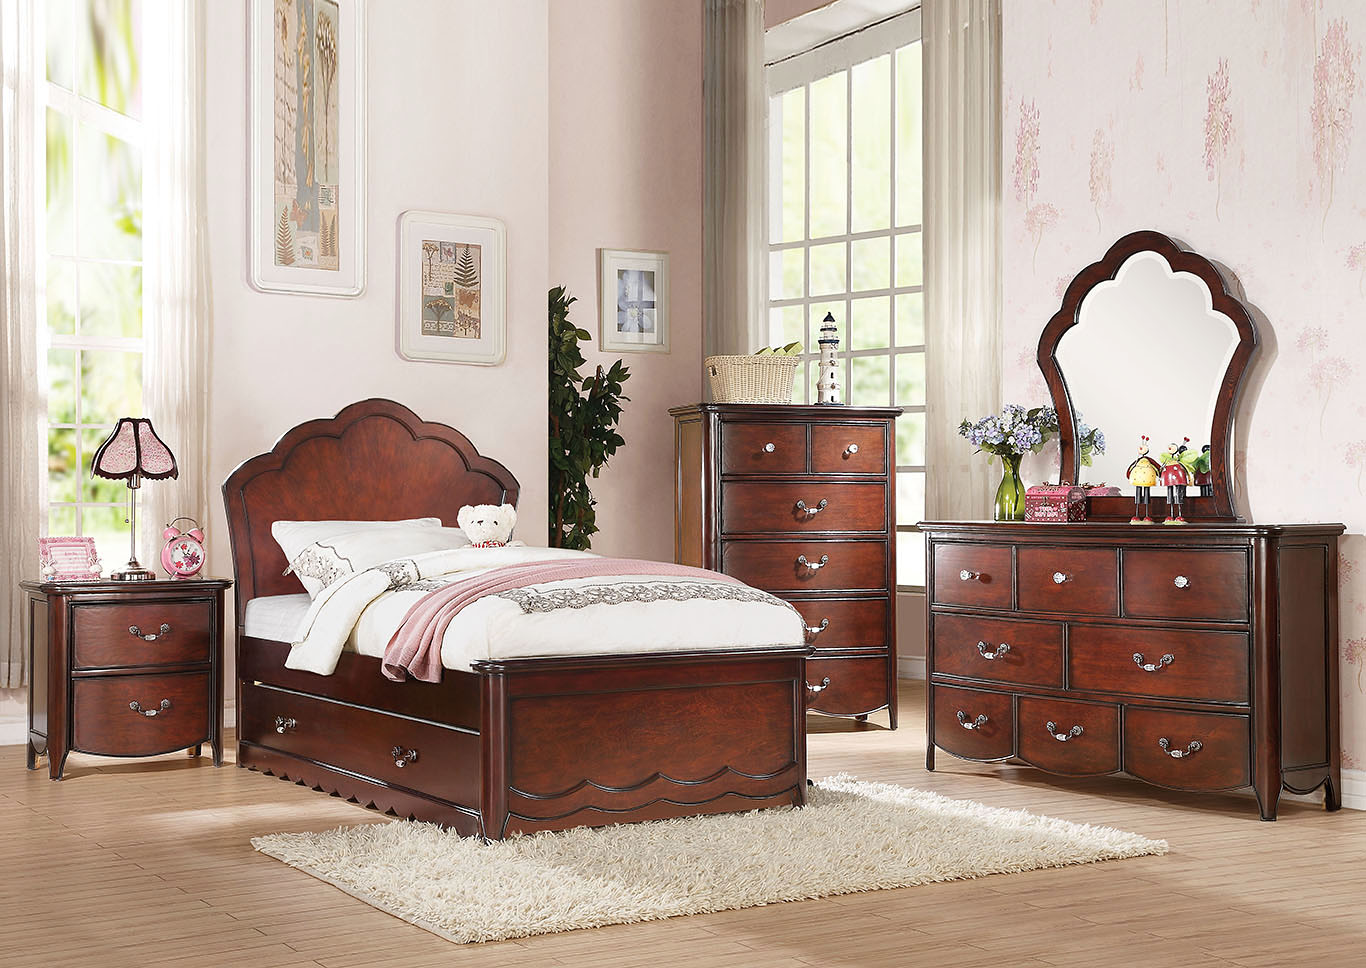 Goree S Furniture Opelika Al Cecilie Cherry Full Panel Bed W